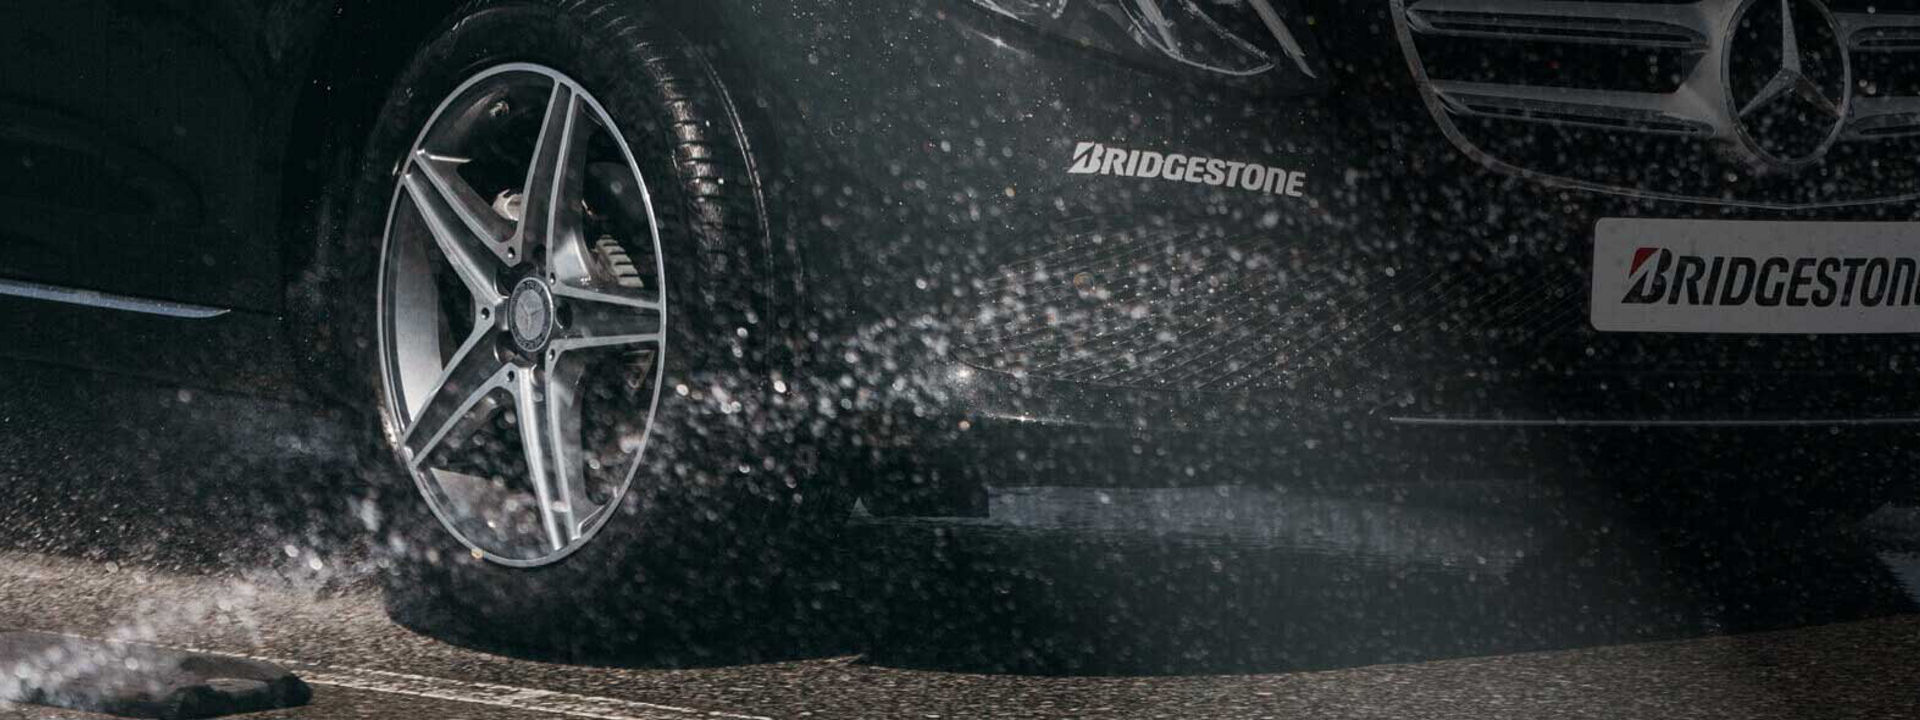 This image is a close-up of a Bridgestone Turanza tyre driving through wet conditions